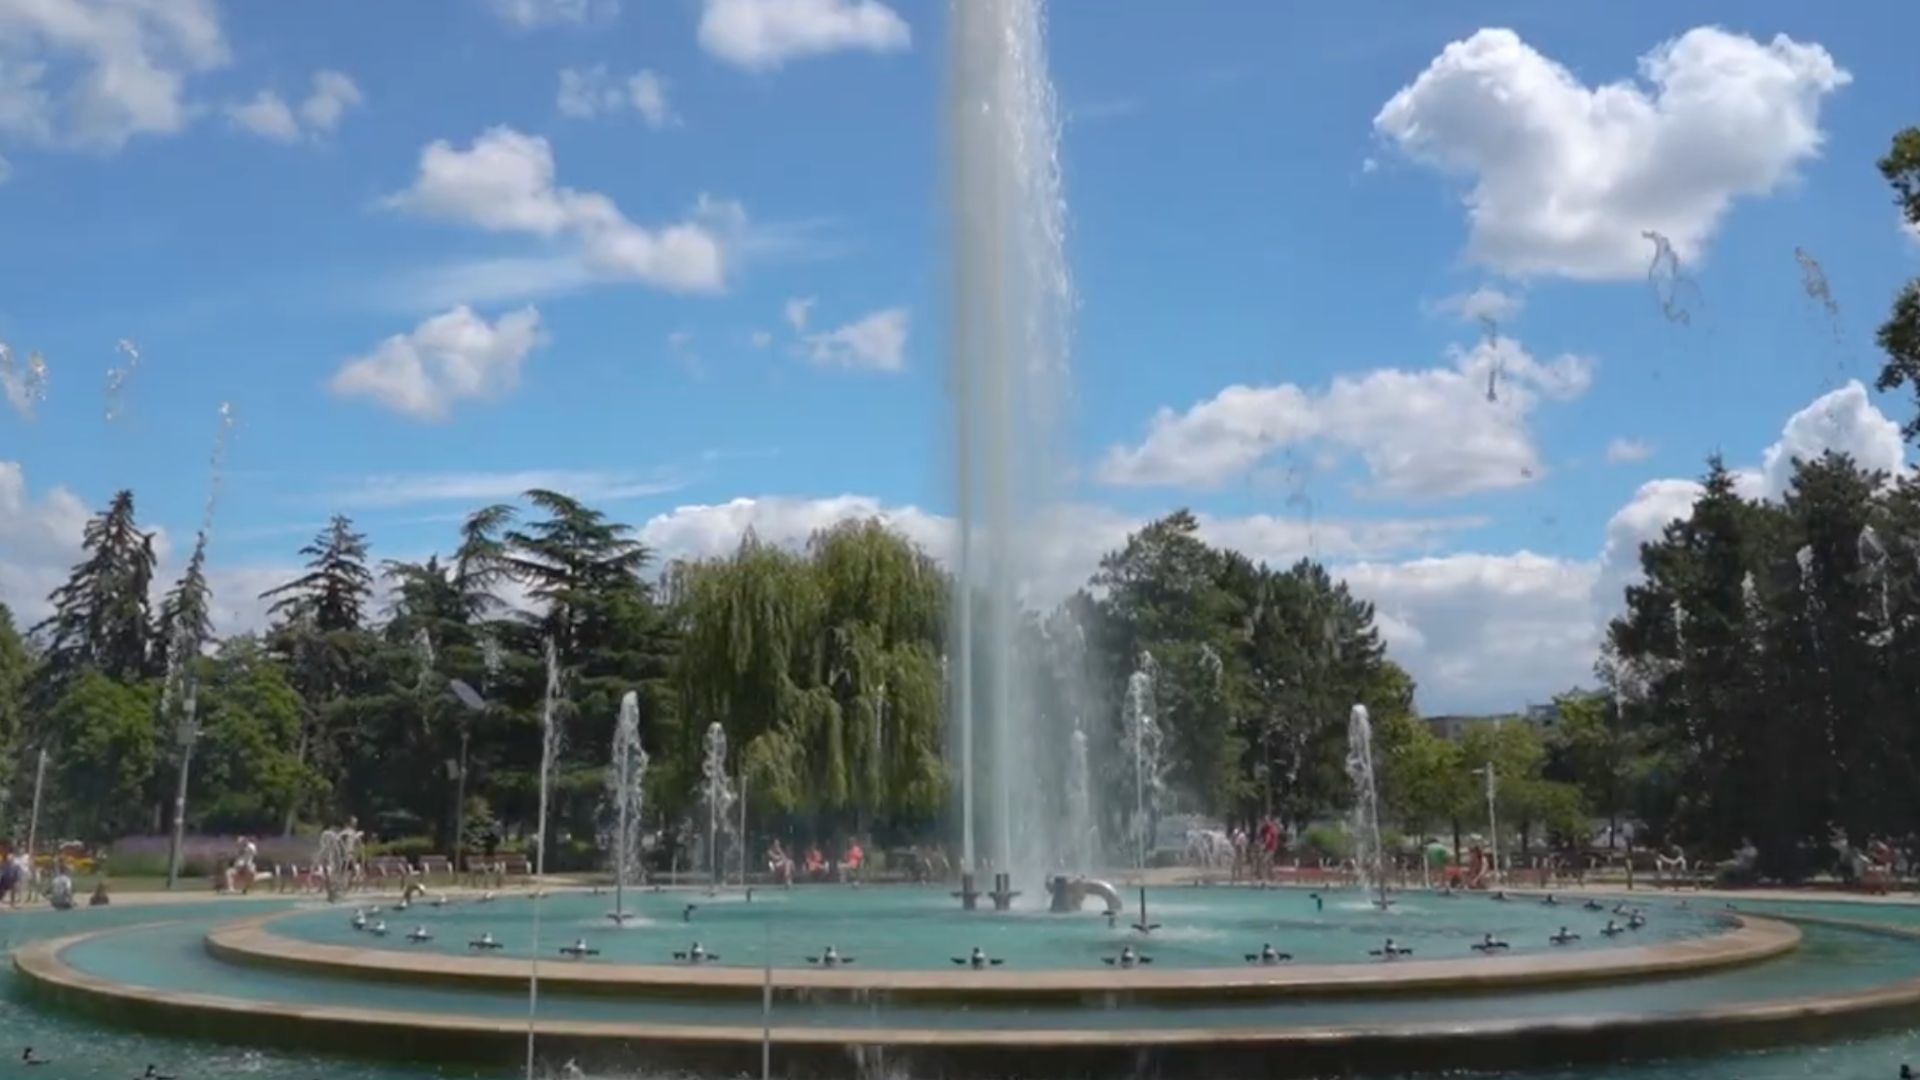 A large musical fountain on Margaret Island in Budapest, on a sunny day with people and trees in the background.